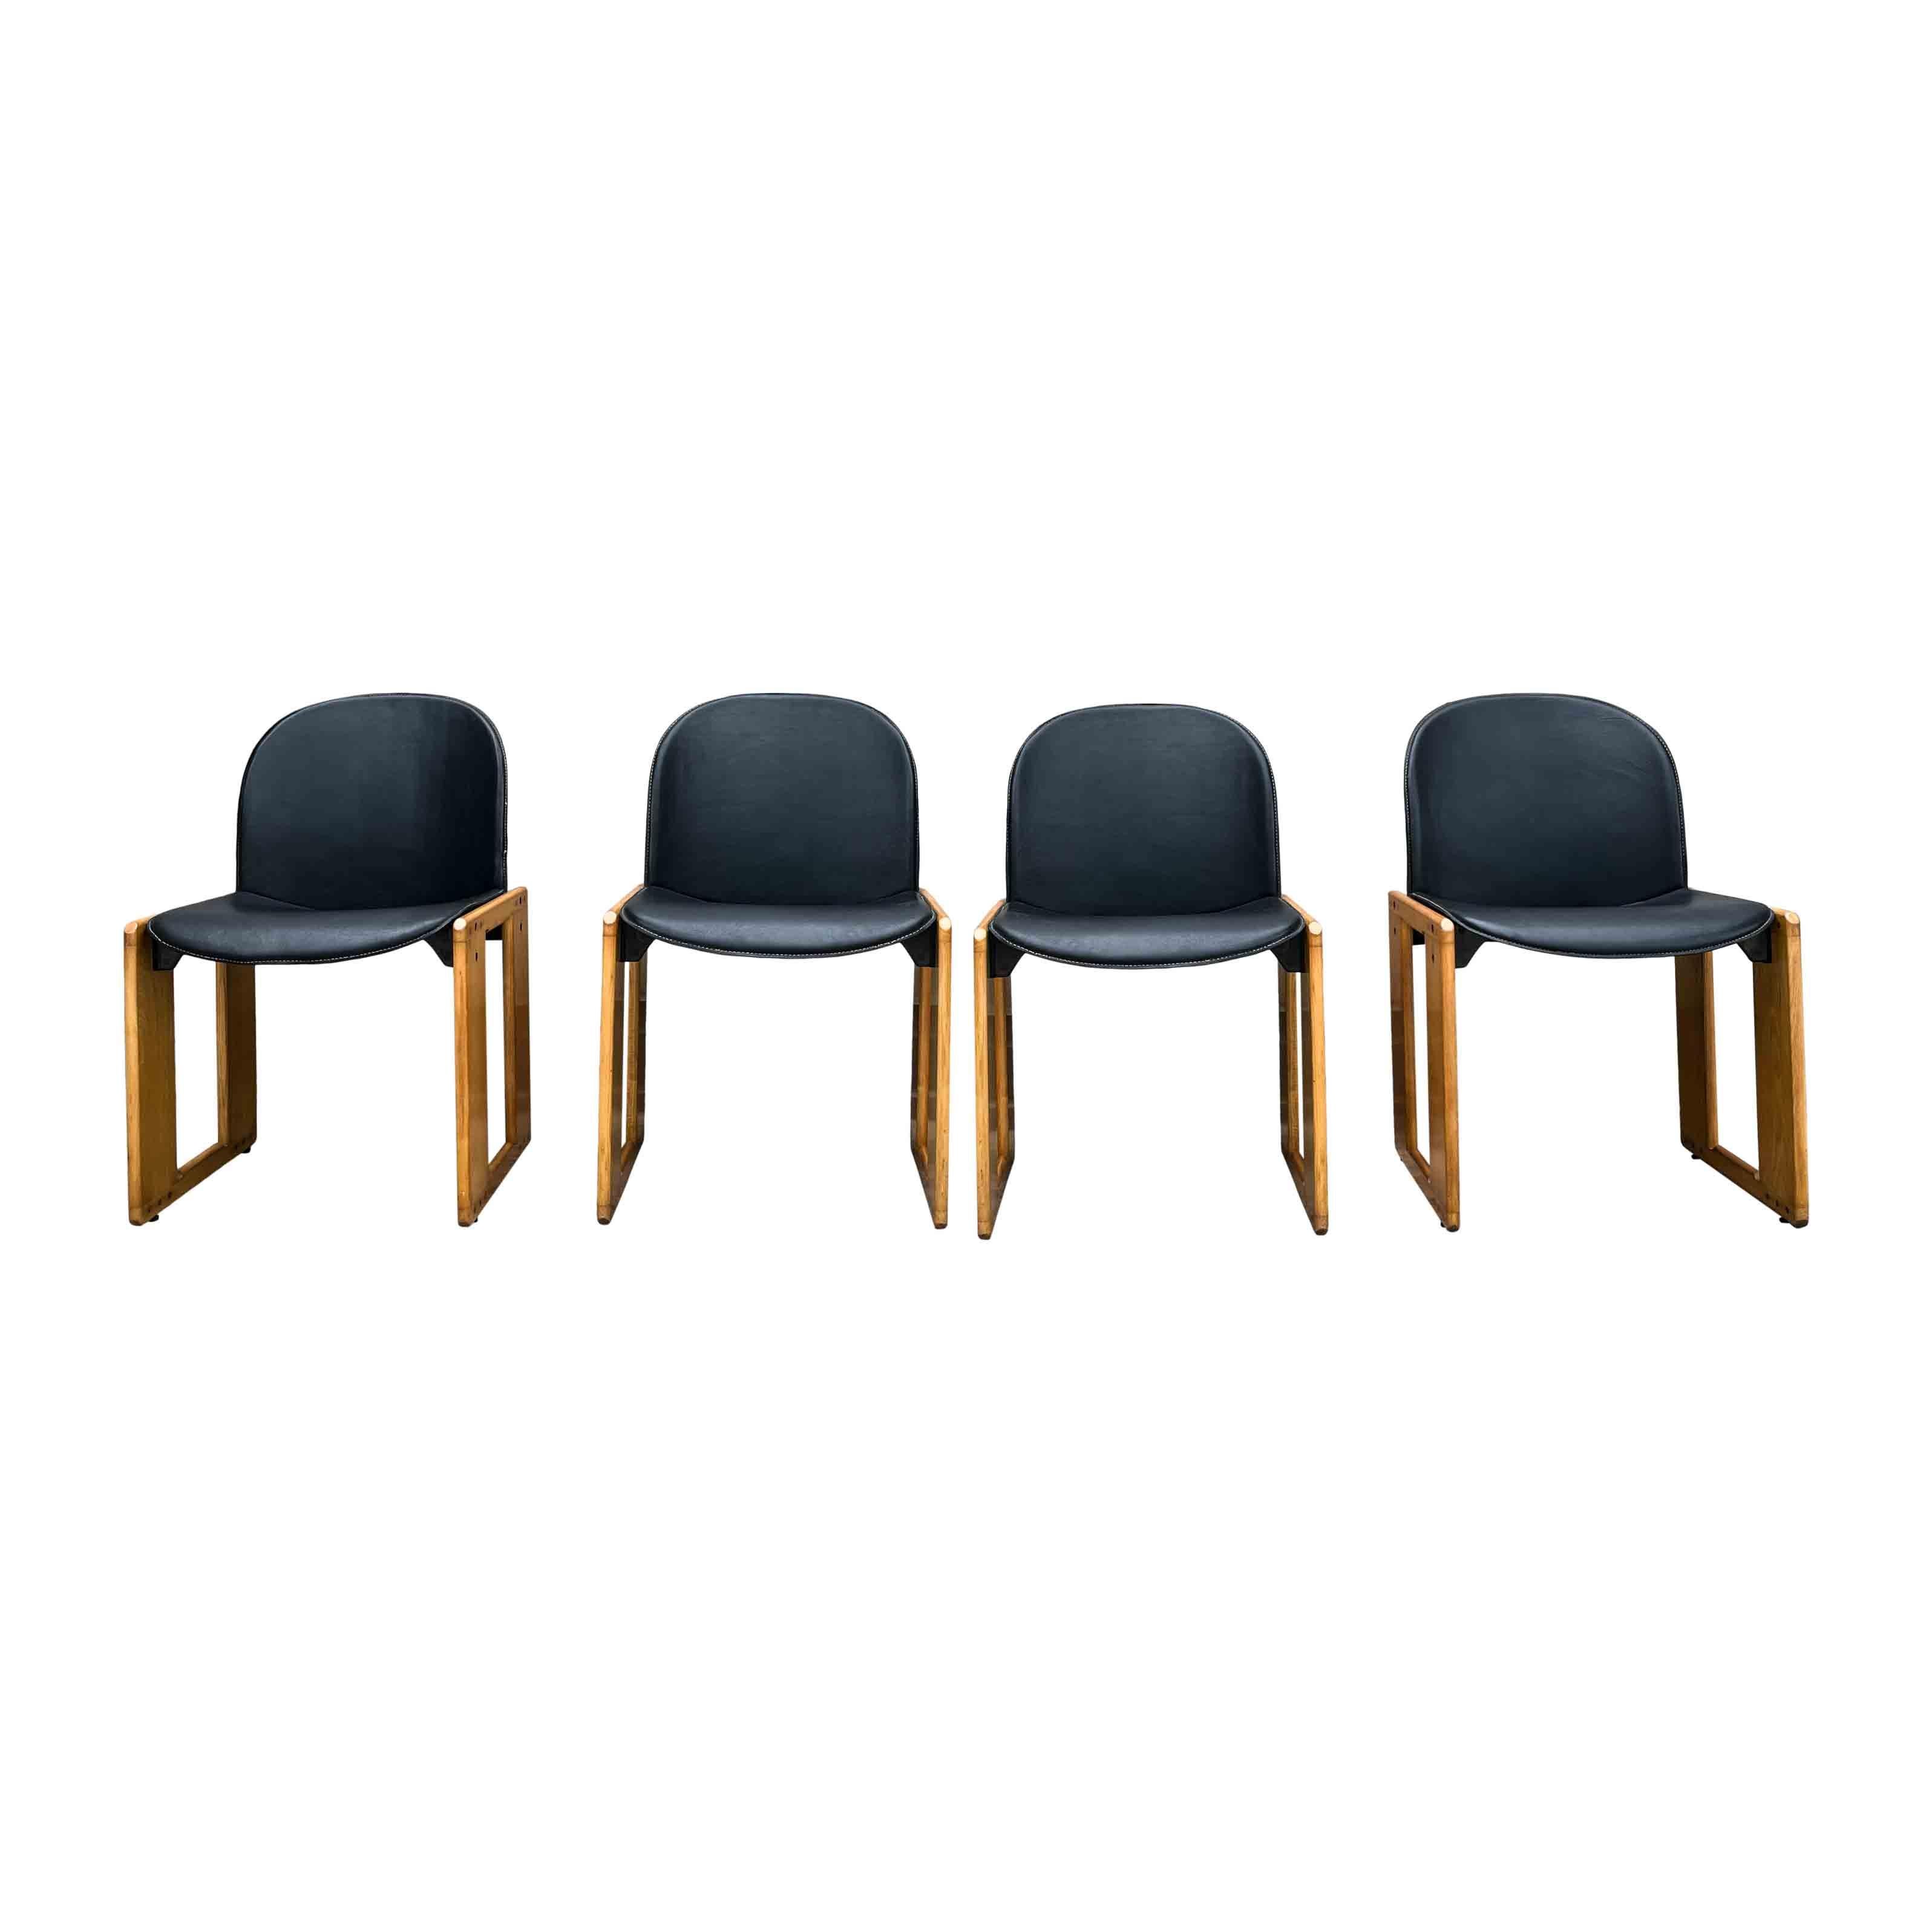 Set of 4 Dialogo chairs designed by Afra and Tobia Scarpa for B&B Italia in 1973.

The chairs are composed of a natural ash structure and a fiberglass seat and backrest upholstered in black leather.

The structure retrieves the typical Scarpa